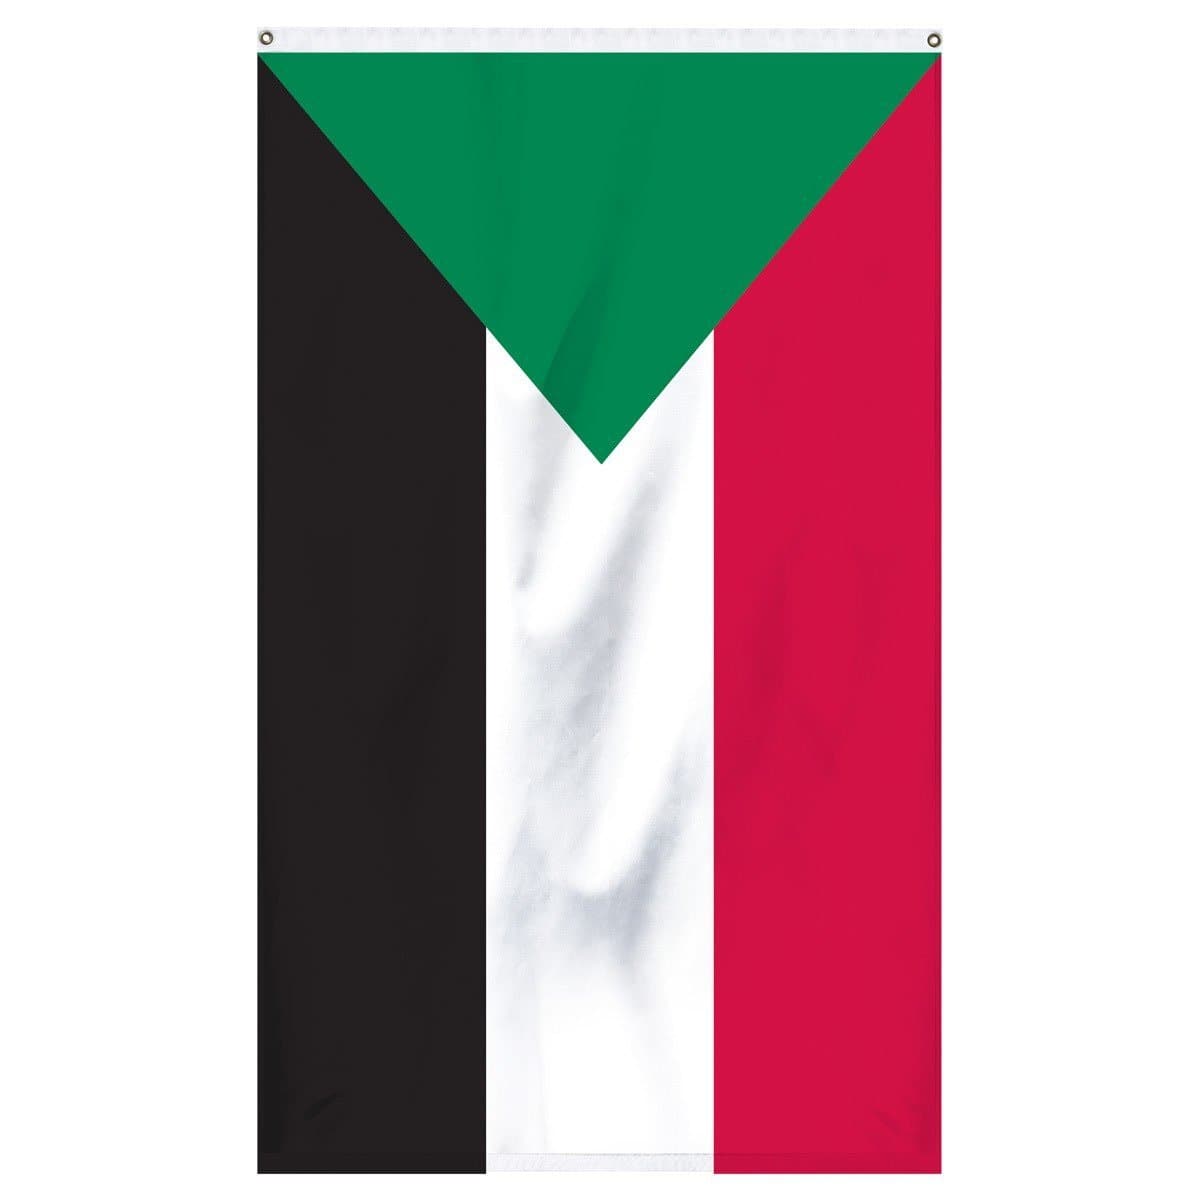 Sudan National flag for sale to buy online from Atlantic Flag and Pole. Green, red, white, and black flag.